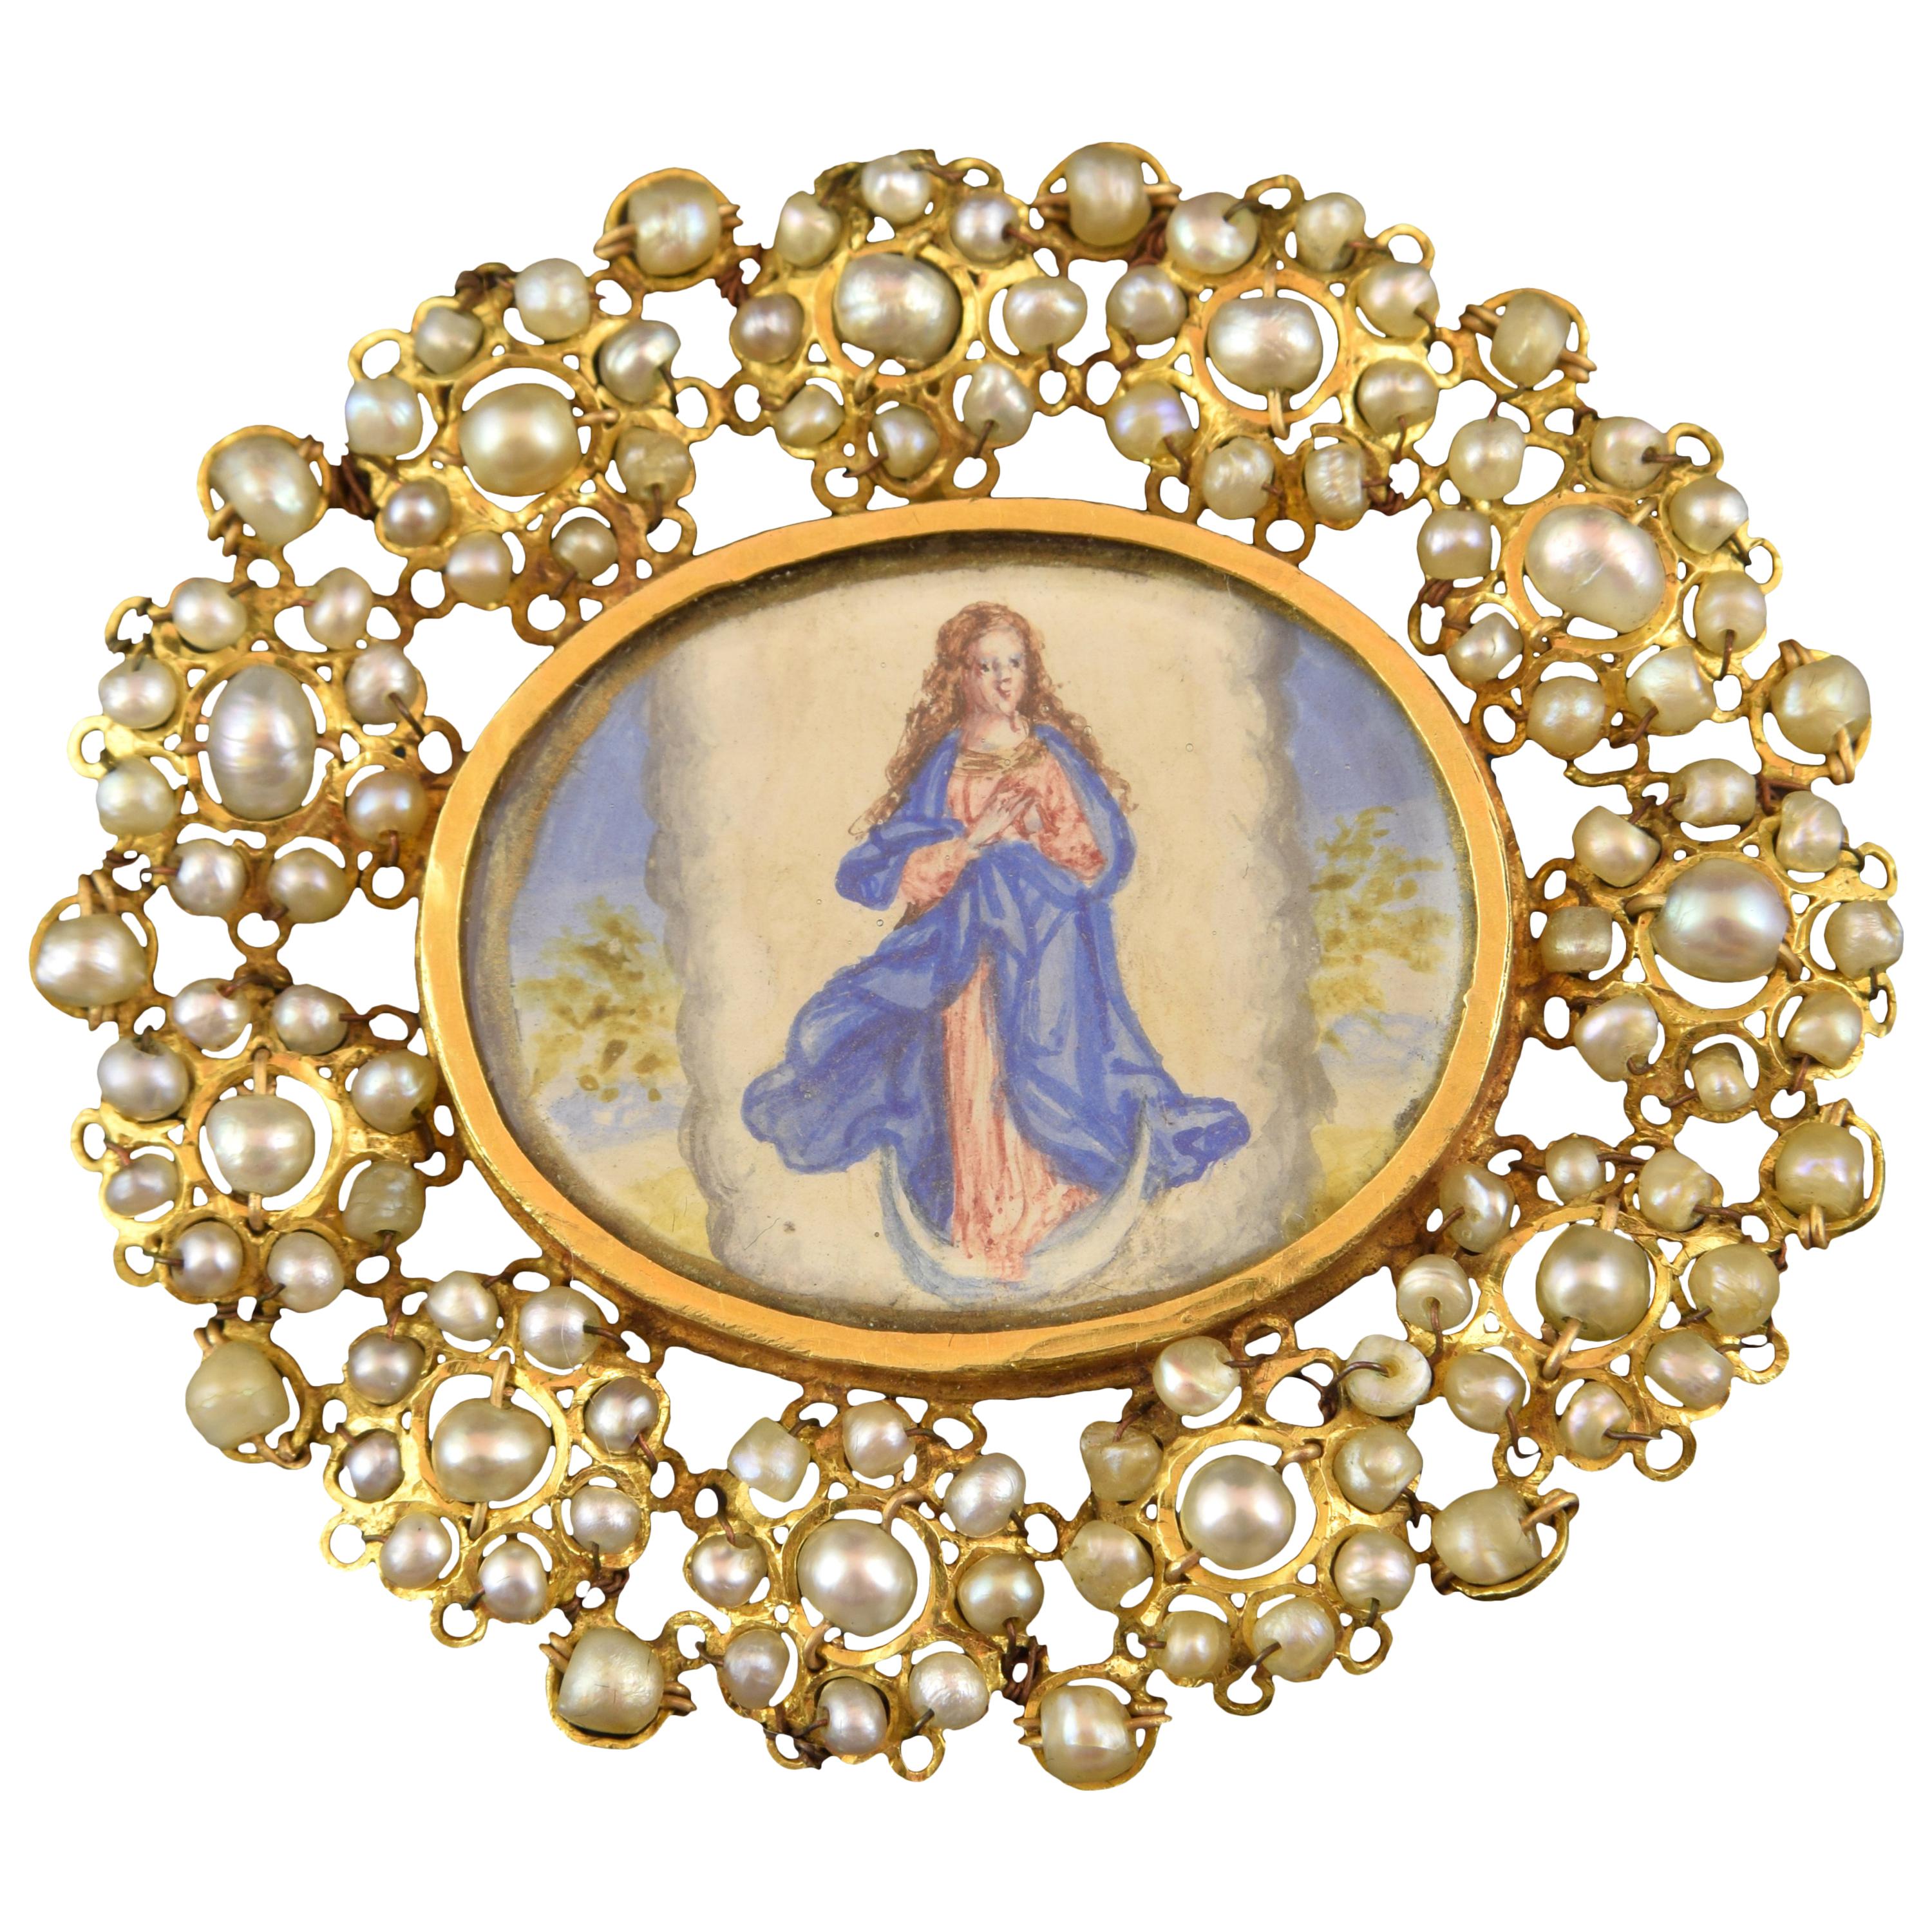 Gold and Pearls Devotional Pendant, 18th Century